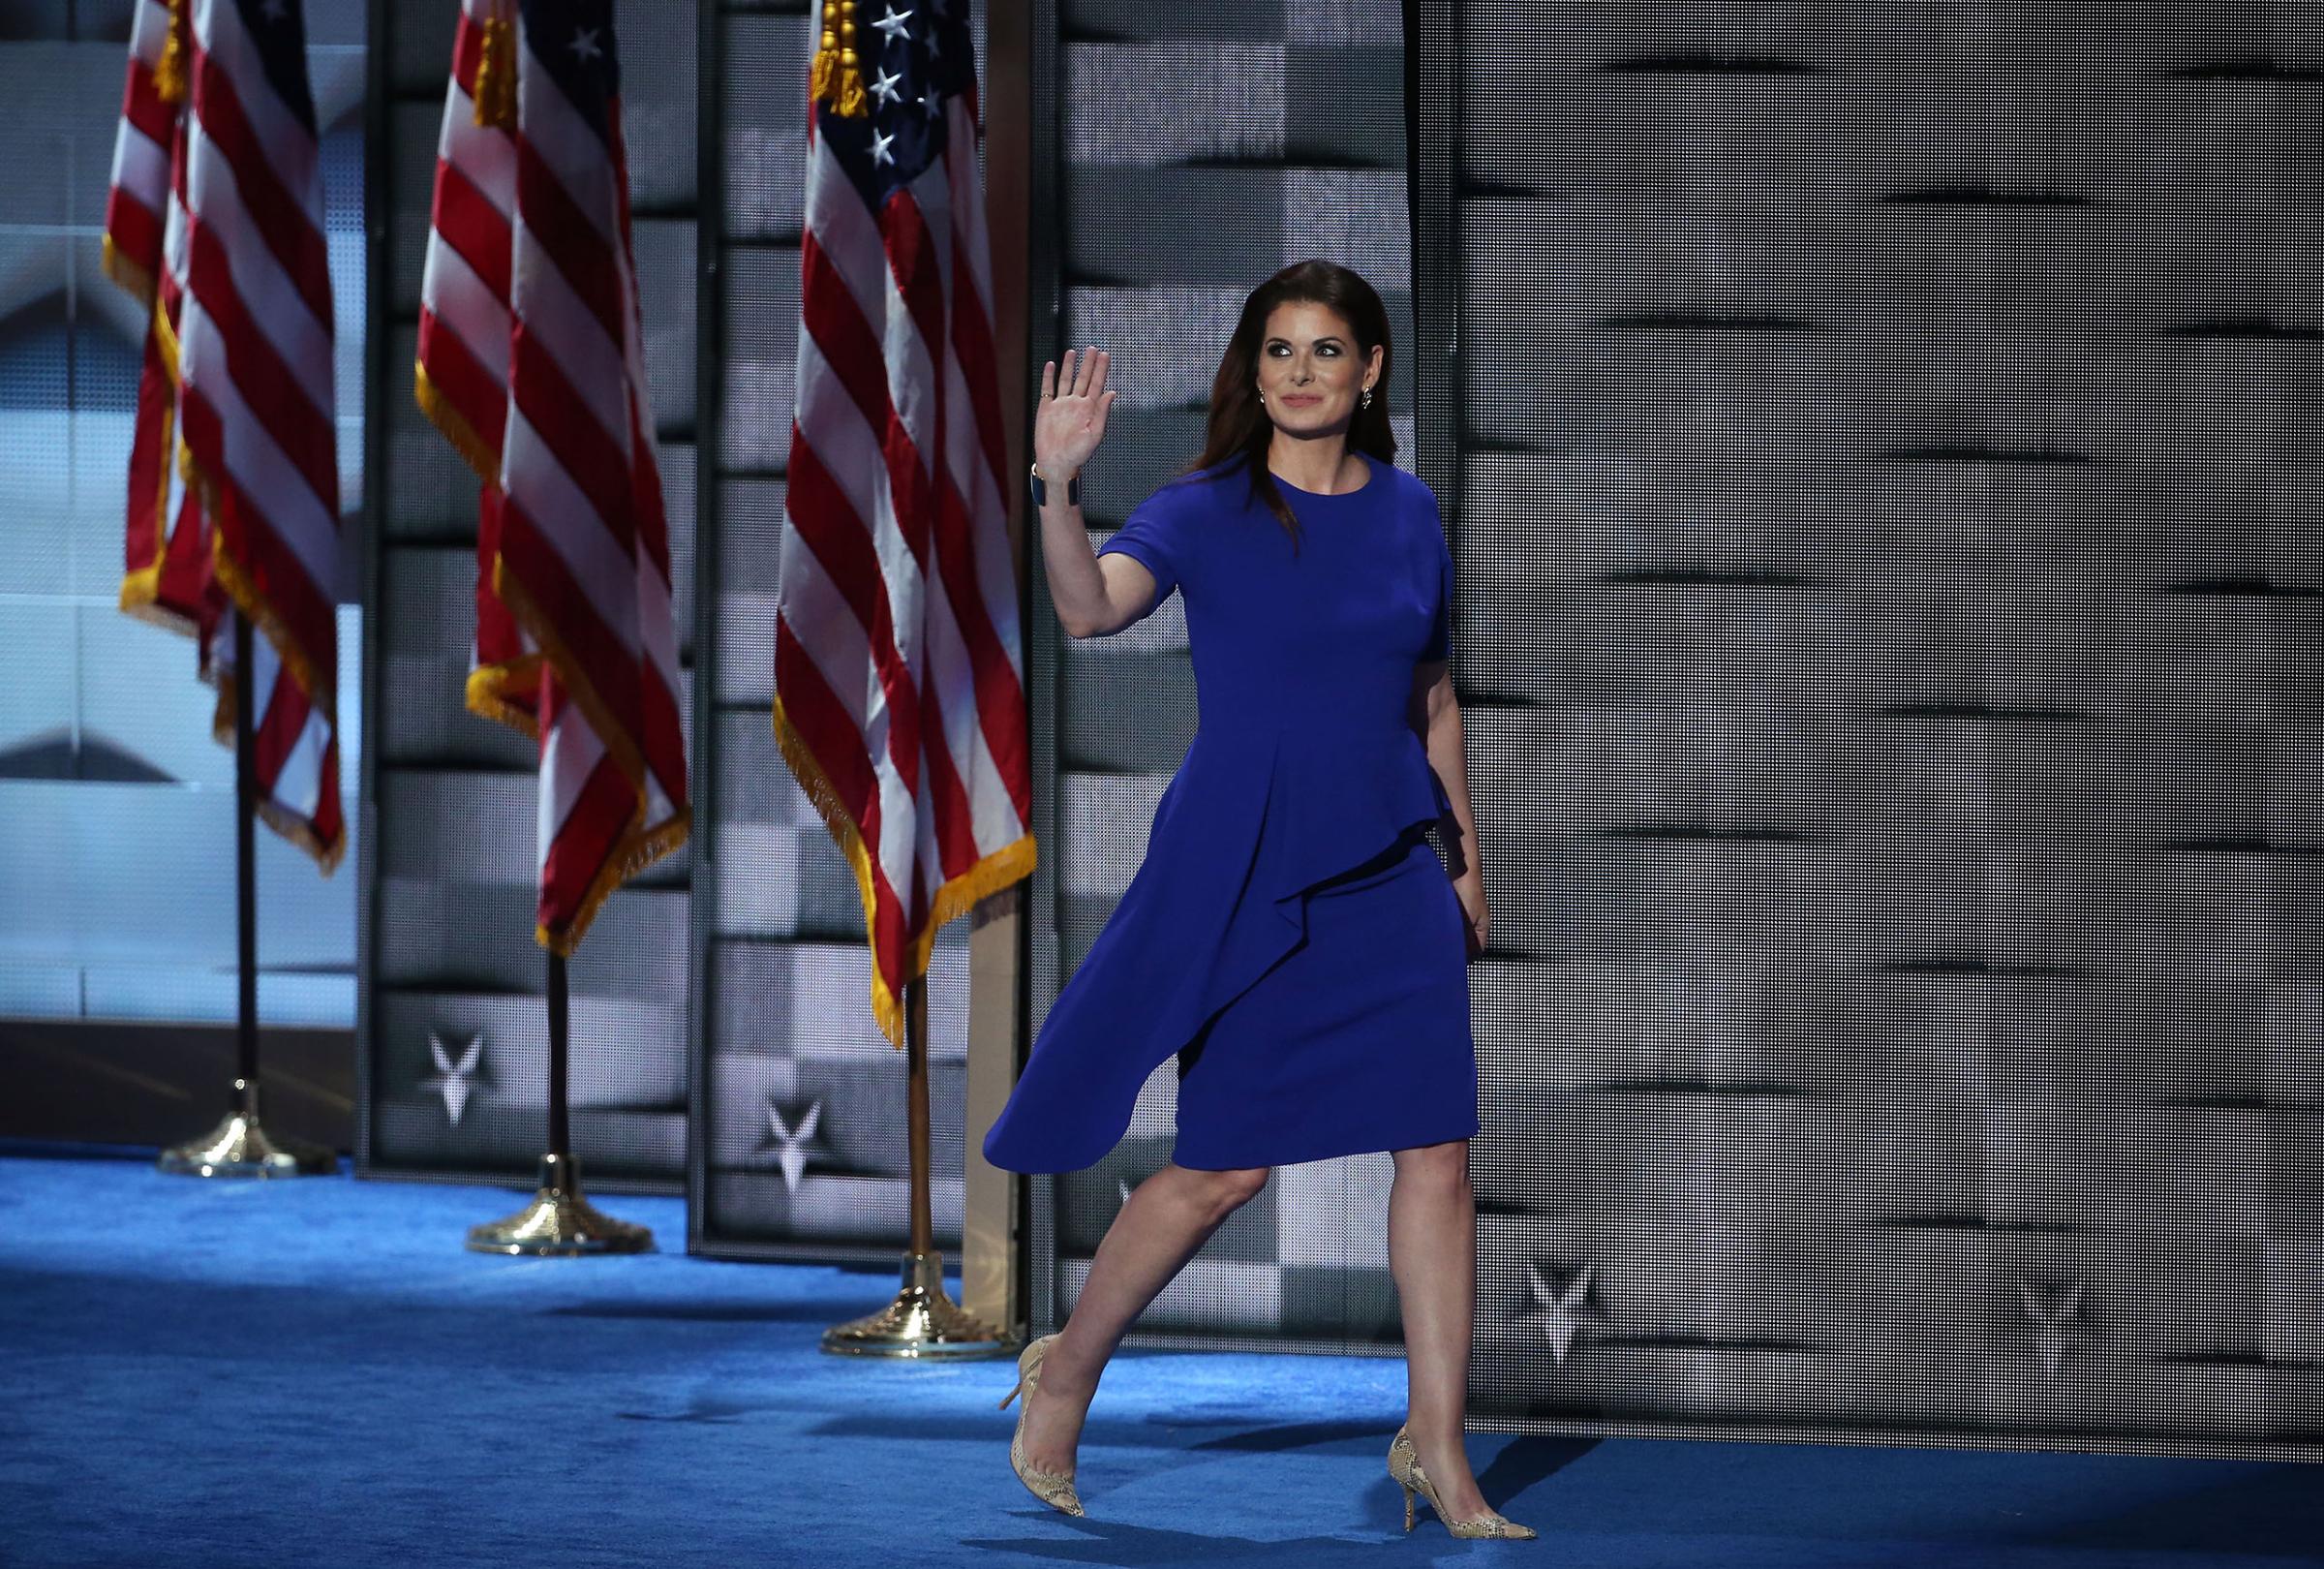 Actress Debra Messing waves while arriving on stage during the Democratic National Convention (DNC) in Philadelphia, Pennsylvania, July 26, 2016.